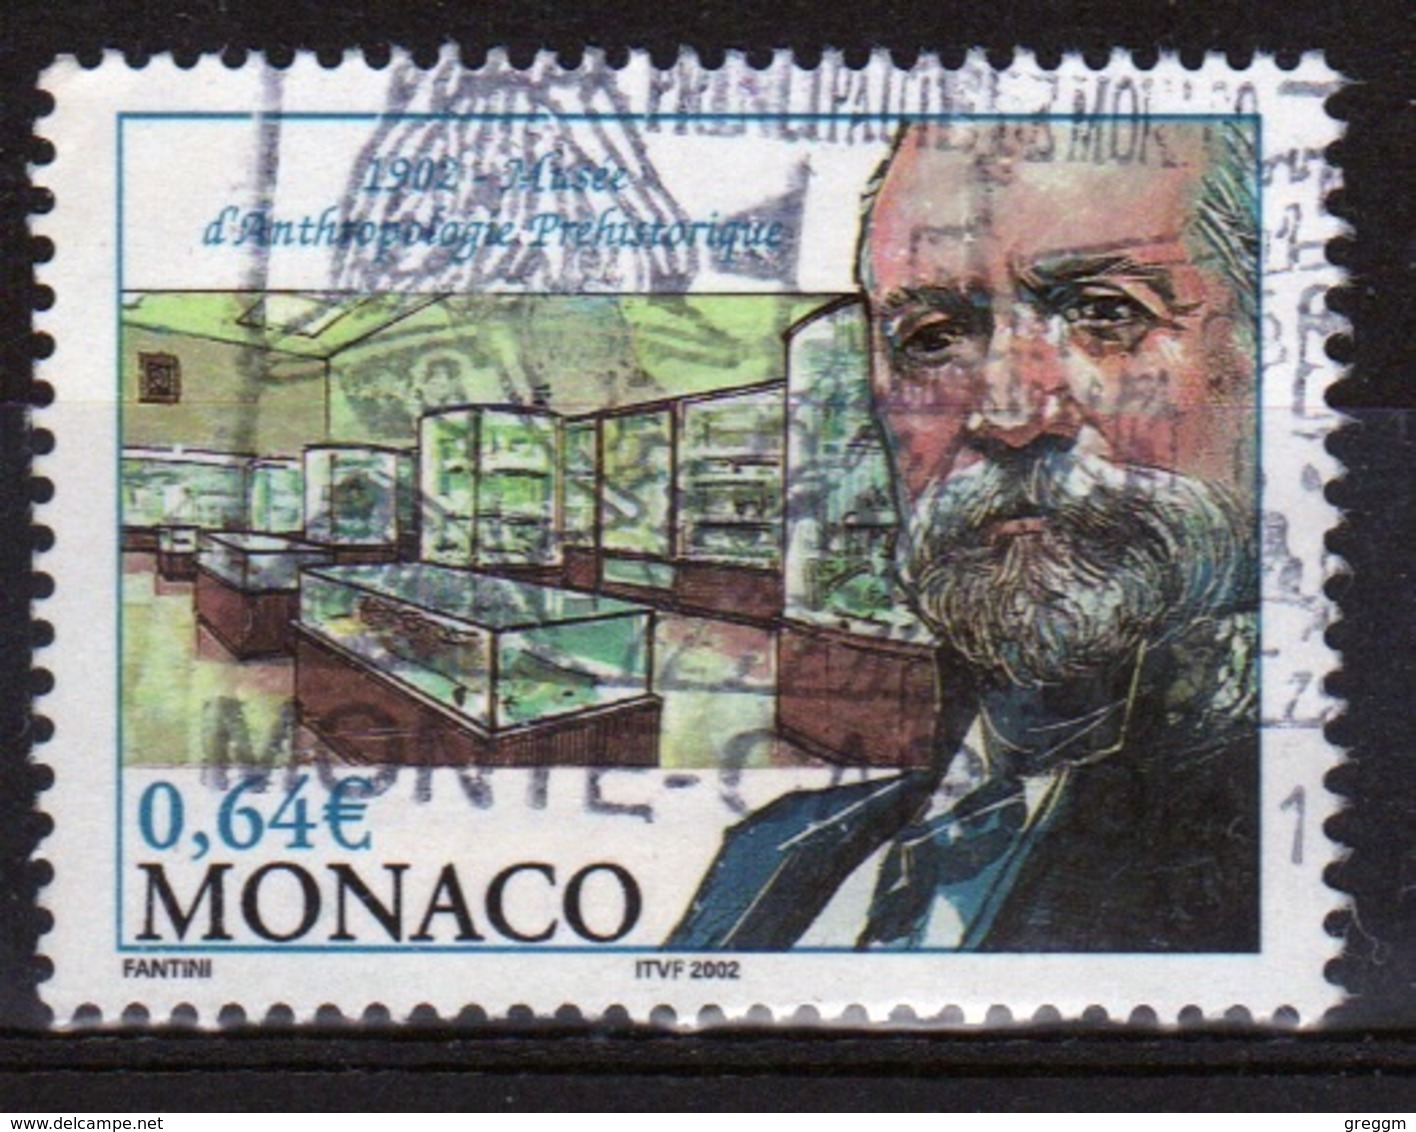 Monaco Single 64c Stamp From 2002 Set To Celebrate Anniversaries. - Used Stamps